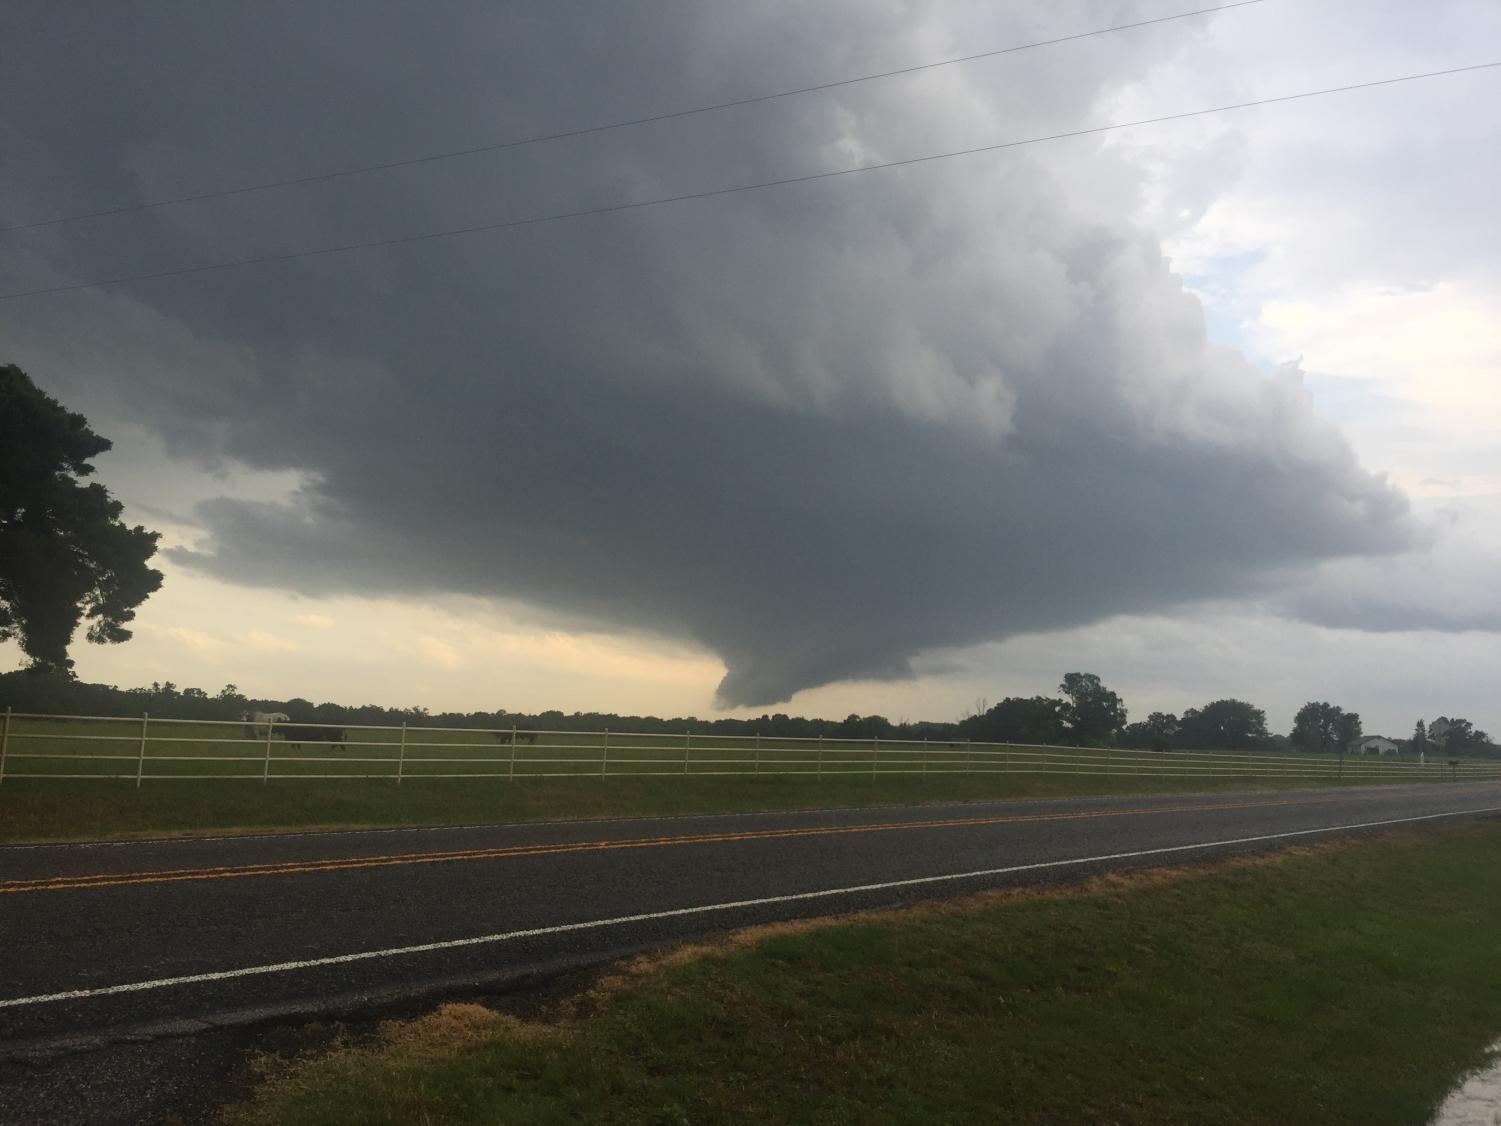 Clouds were rotating forming a tornado in the distance. This was the start of the storm that wrecked Van in May 2019.